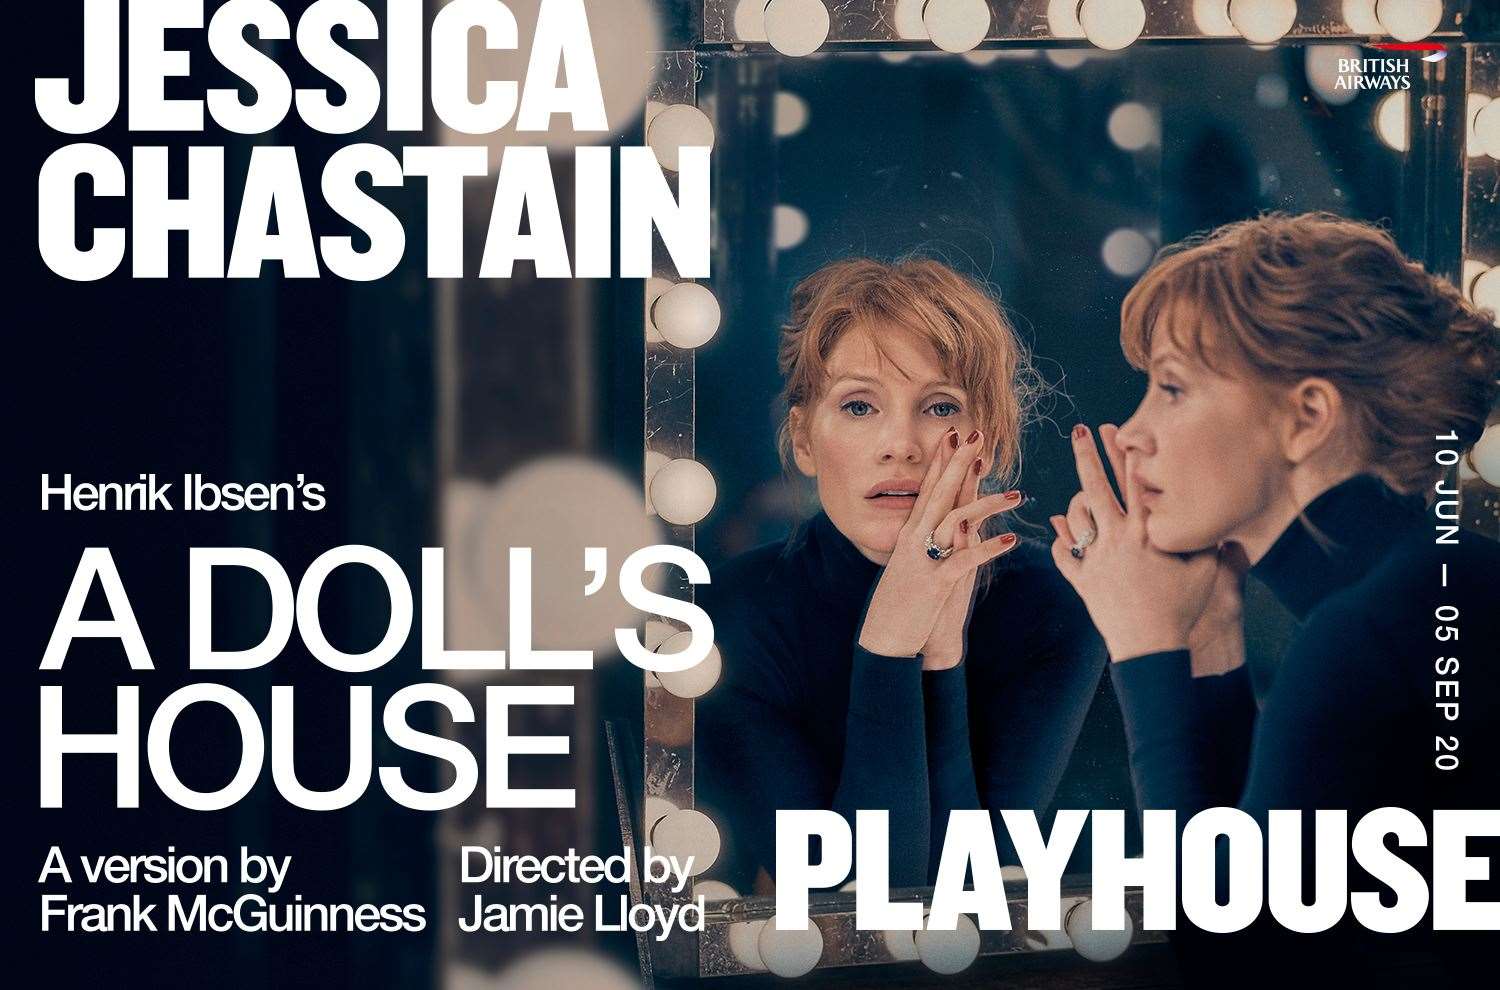 Jessica Chastain will headline the new A Doll's House production at The Playhouse this summer!